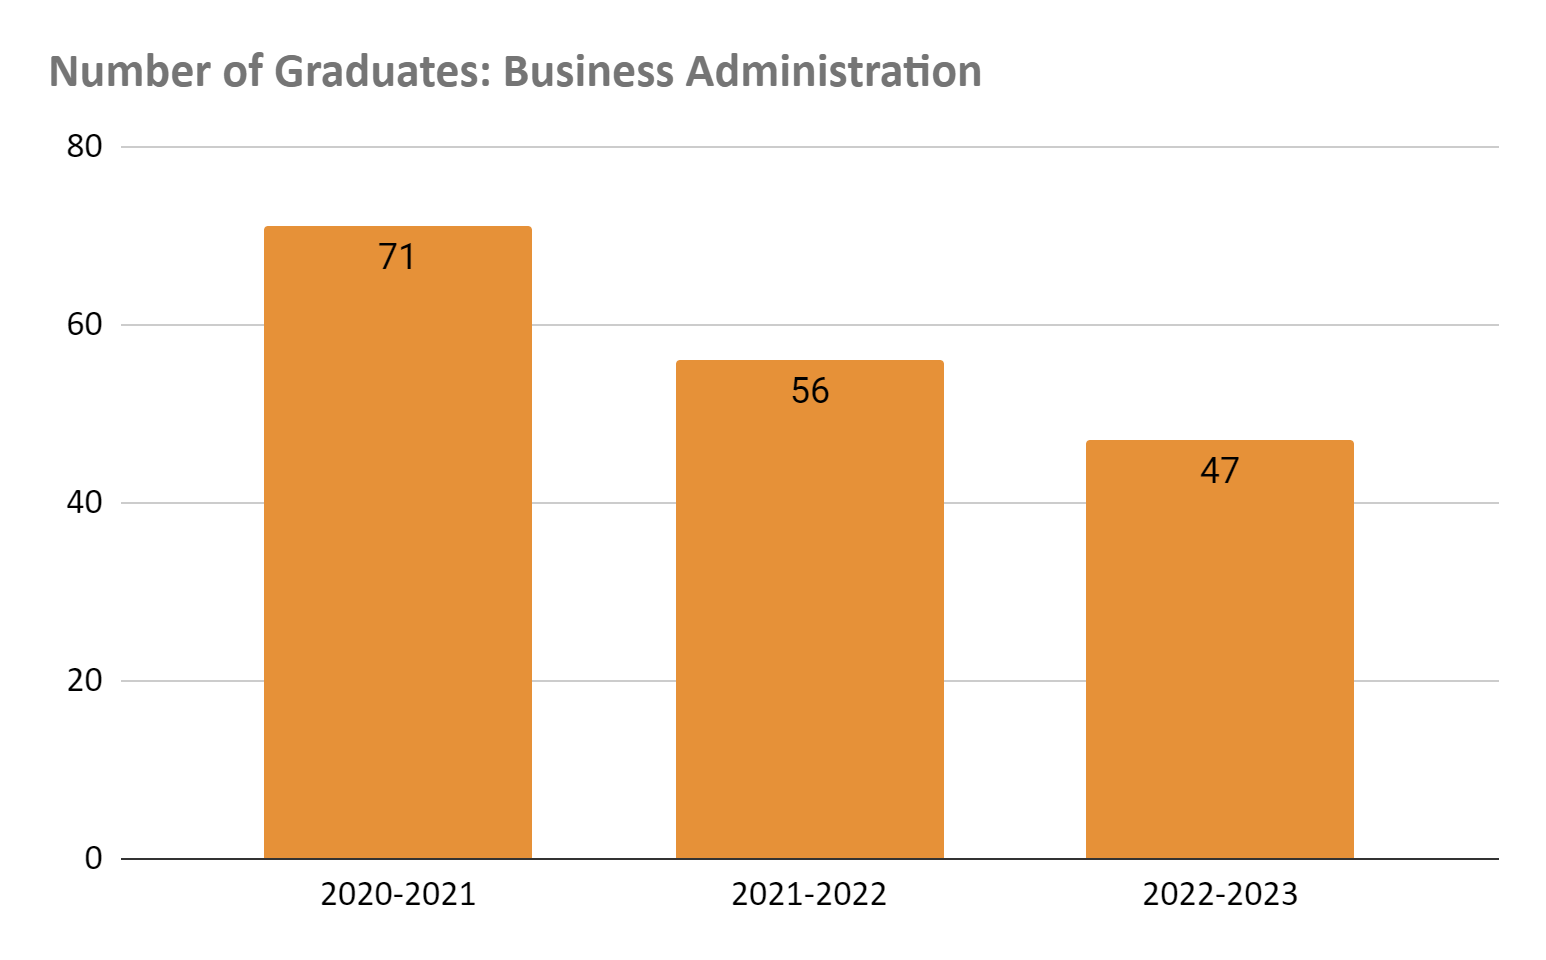 Number of Graduates - Business Administration